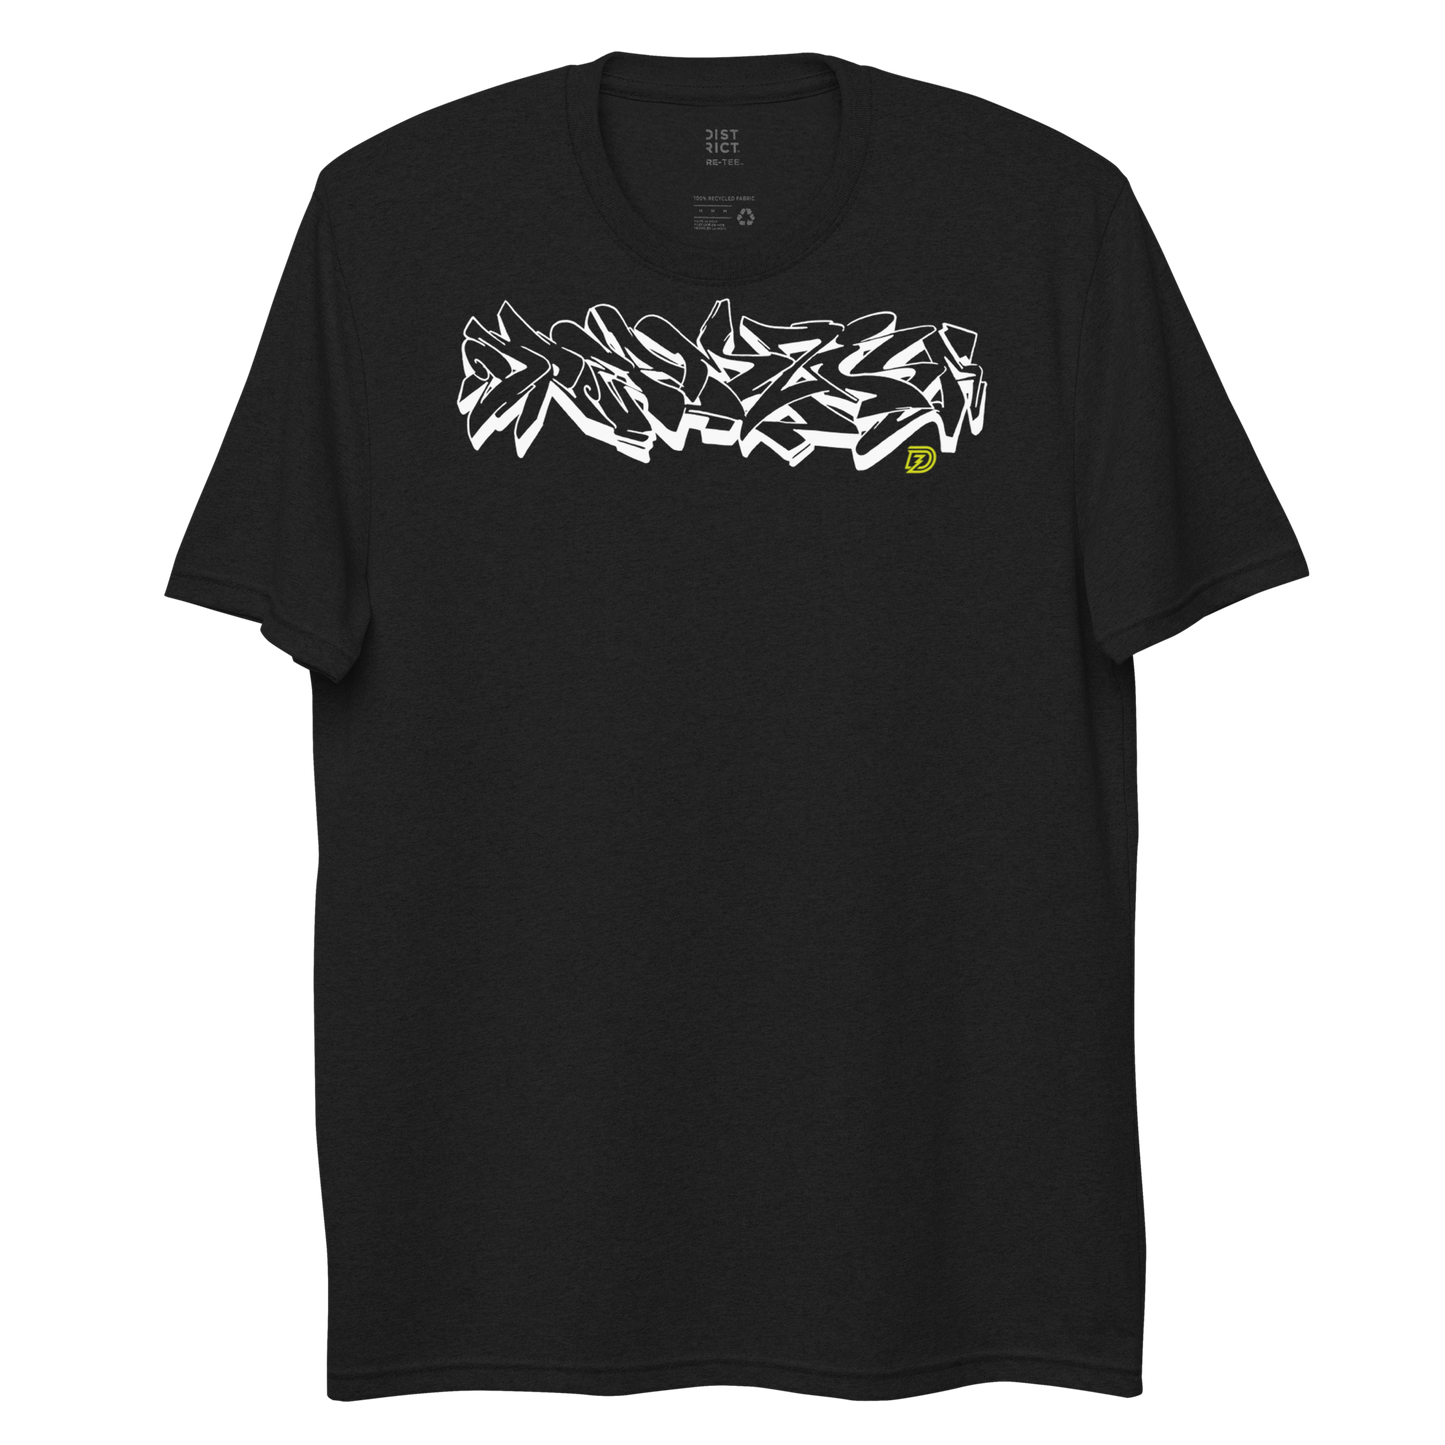 Graffiti Wildstyle 2 by Sanitor Unisex Recycled Short Sleeve Tee in Black